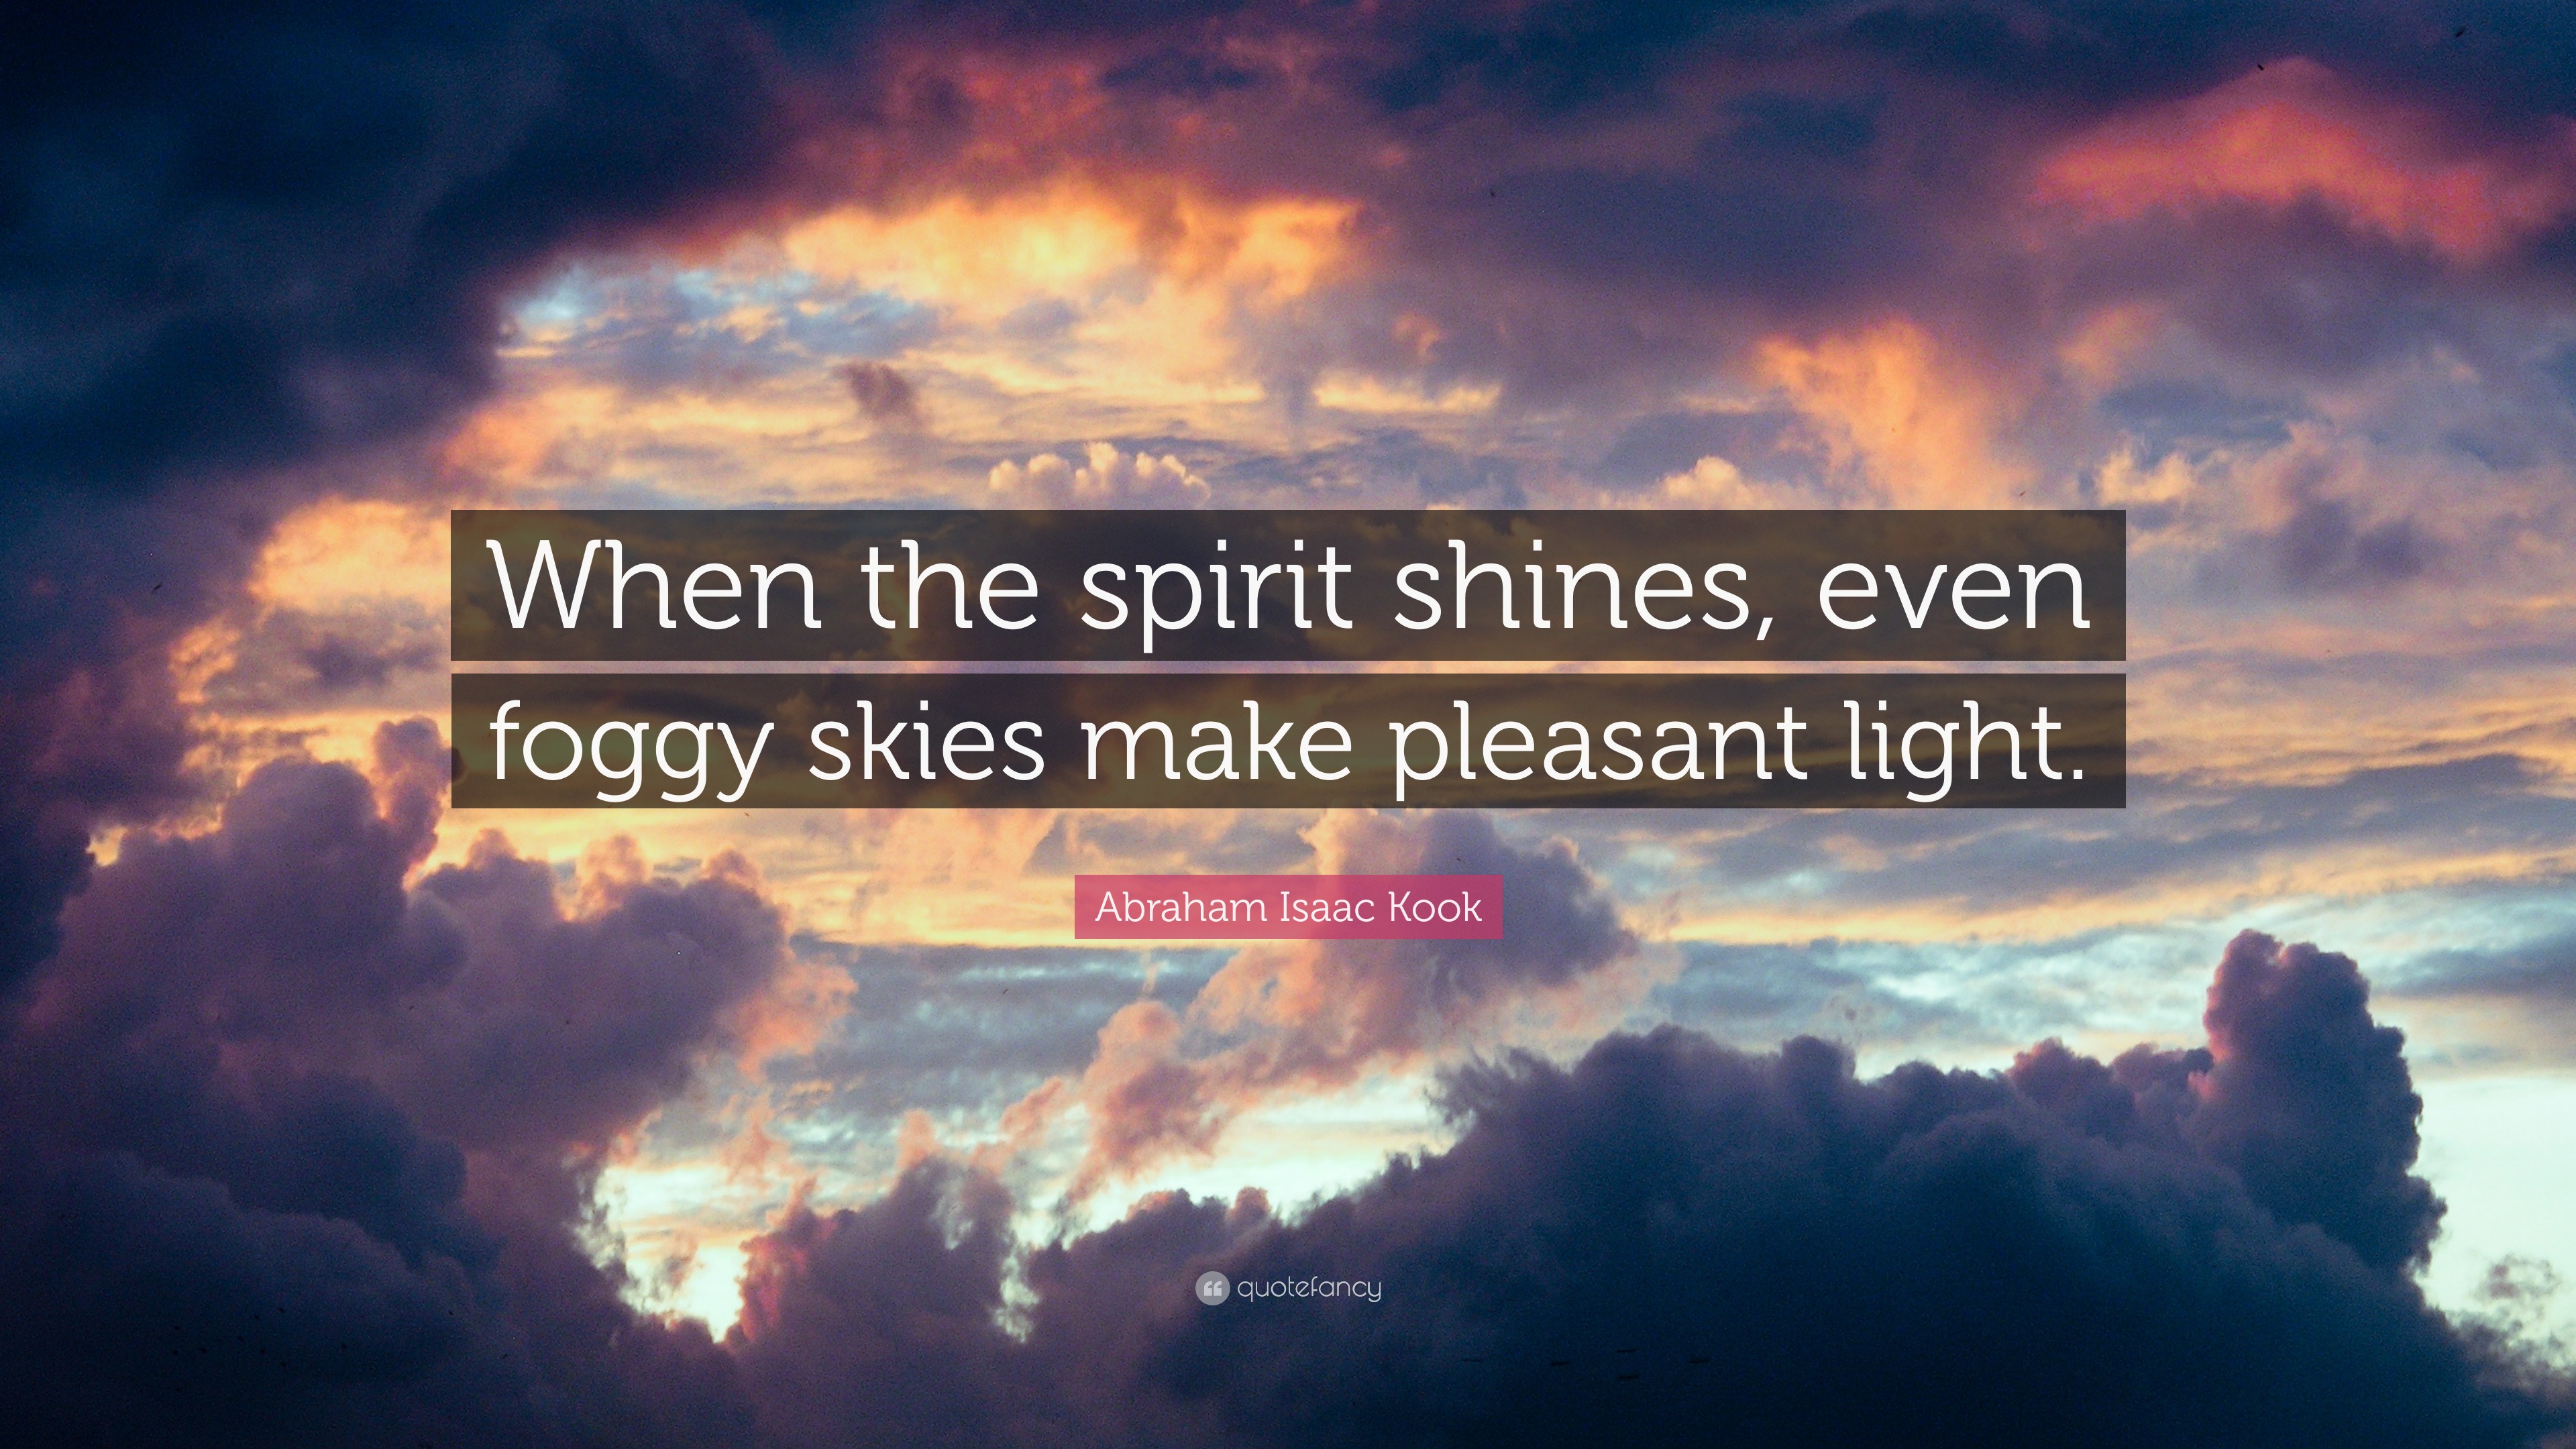 Abraham Isaac Kook Quote “when The Spirit Shines Even Foggy Skies Make Pleasant Light” 